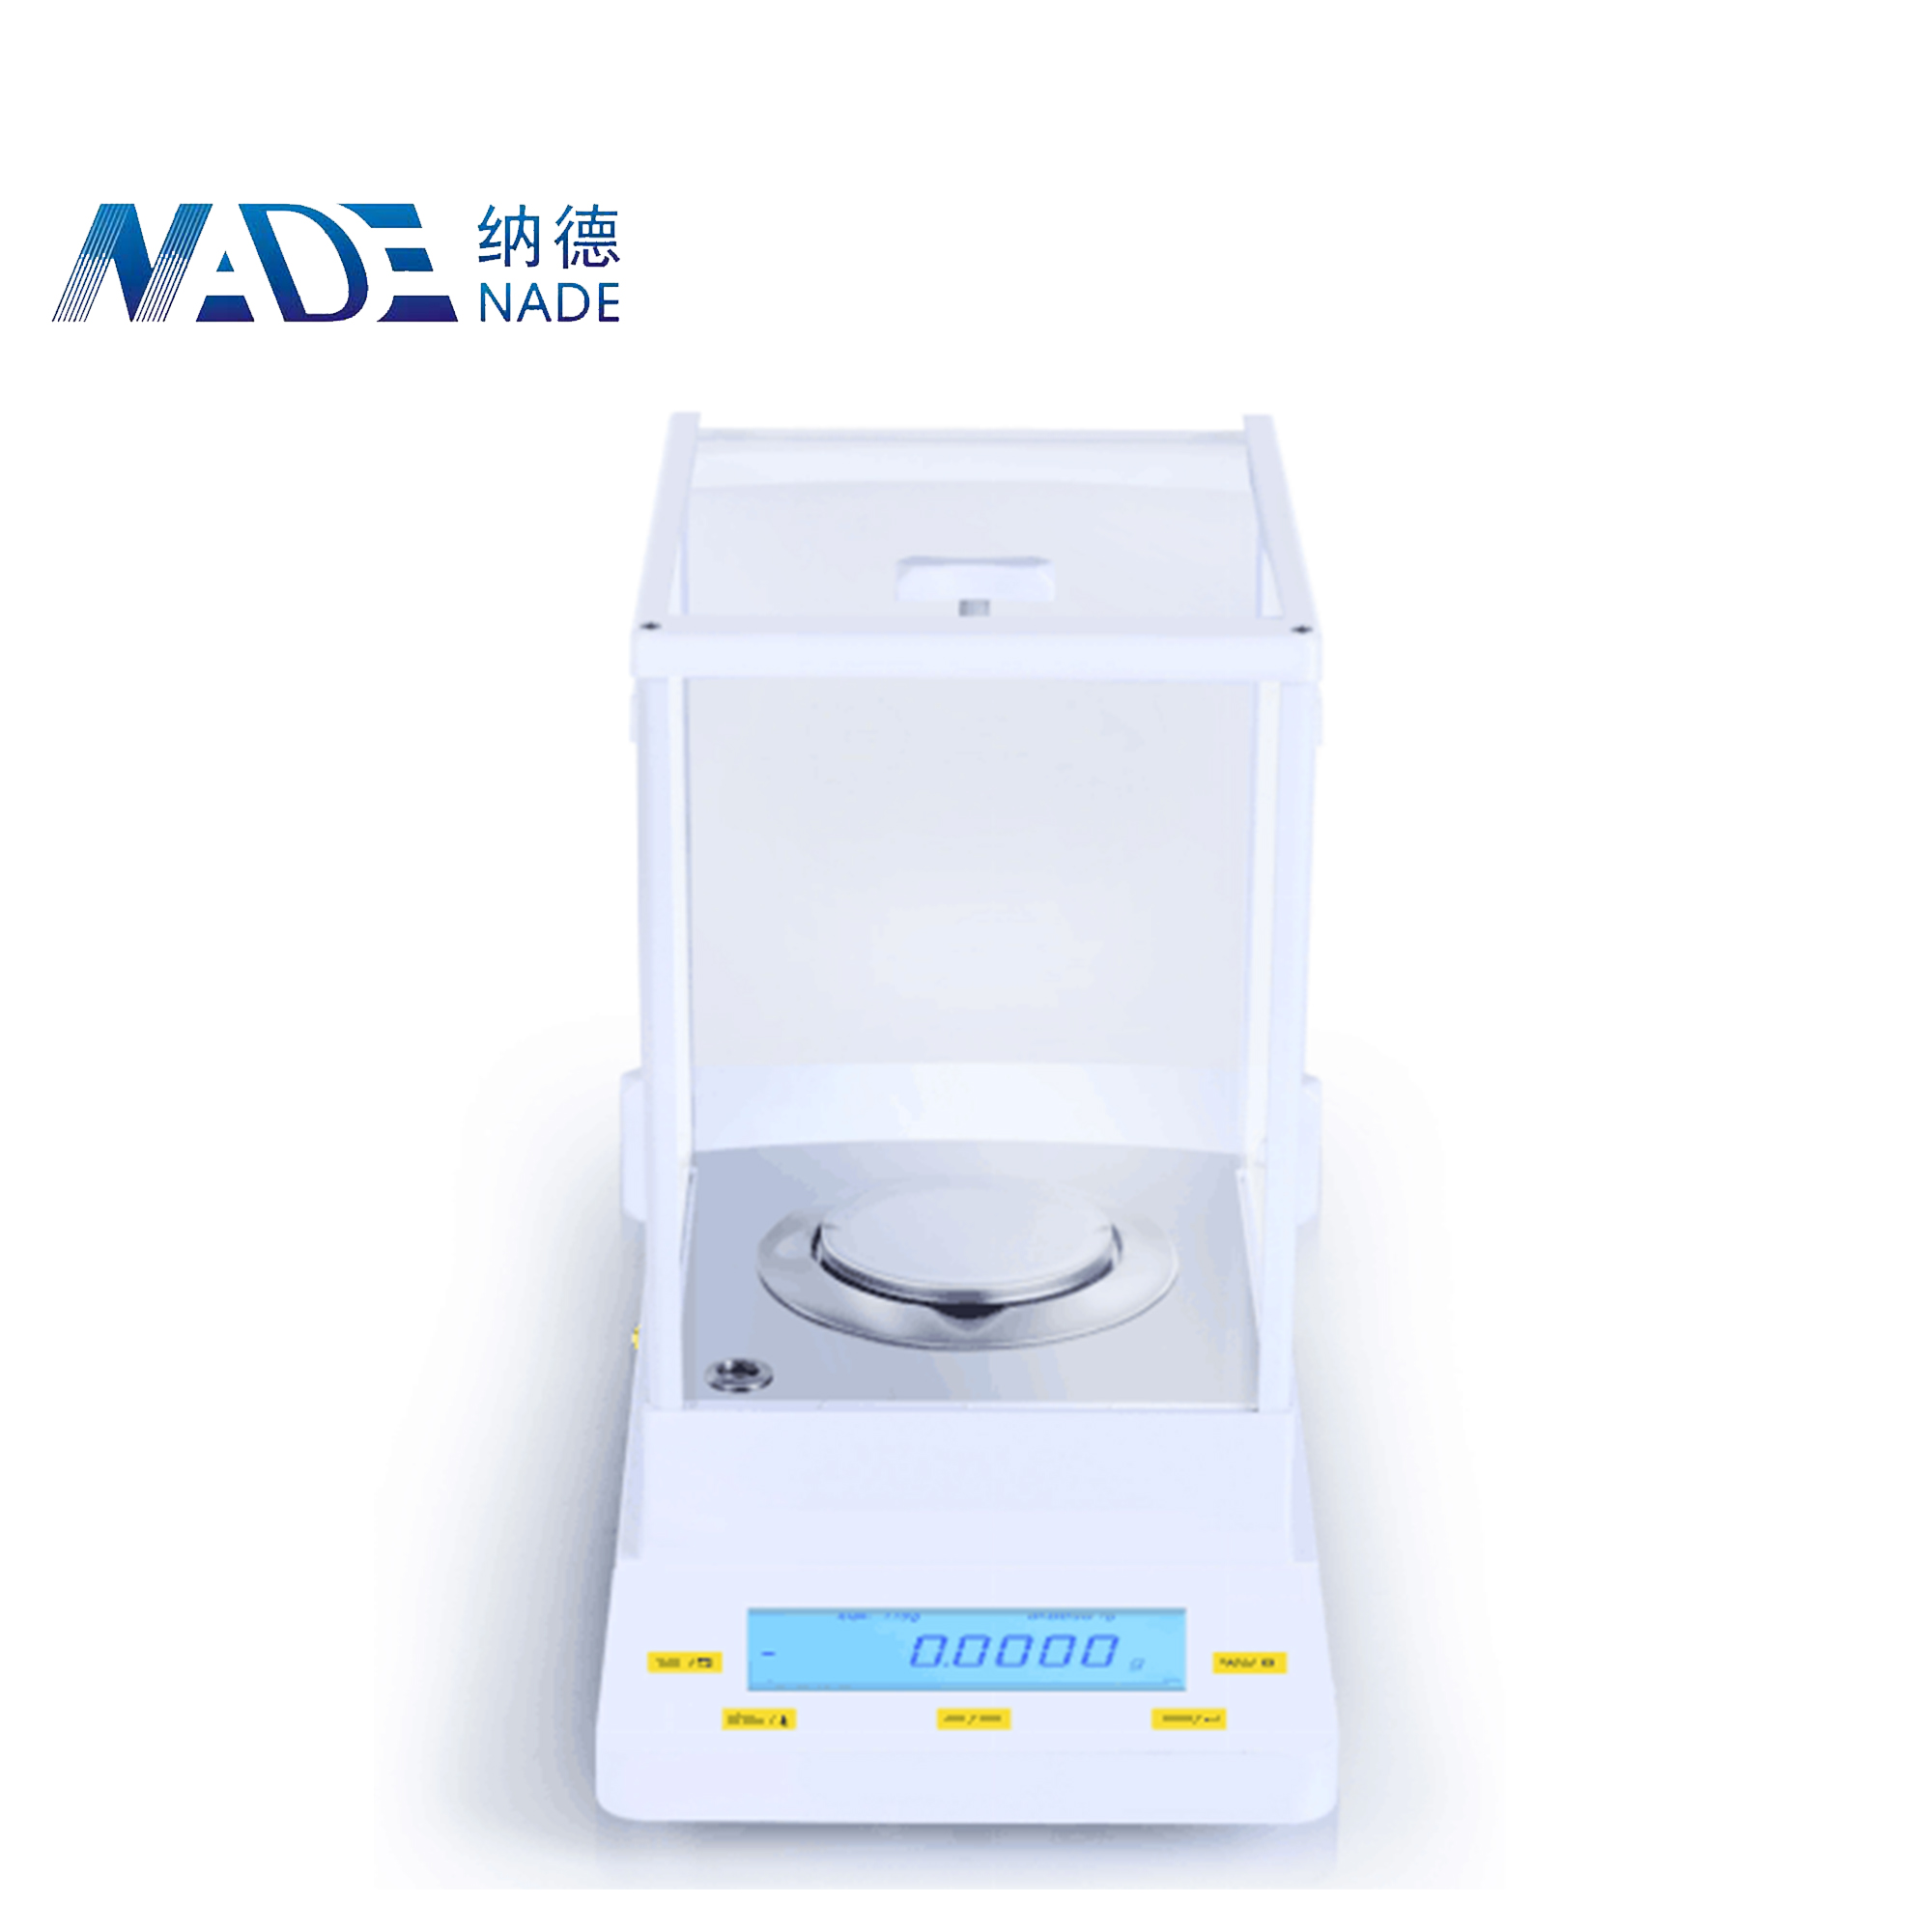 Nade JH Lab Weighing Instrument JA1003N 100g/1mg Precision electronic balance & Digital Scale